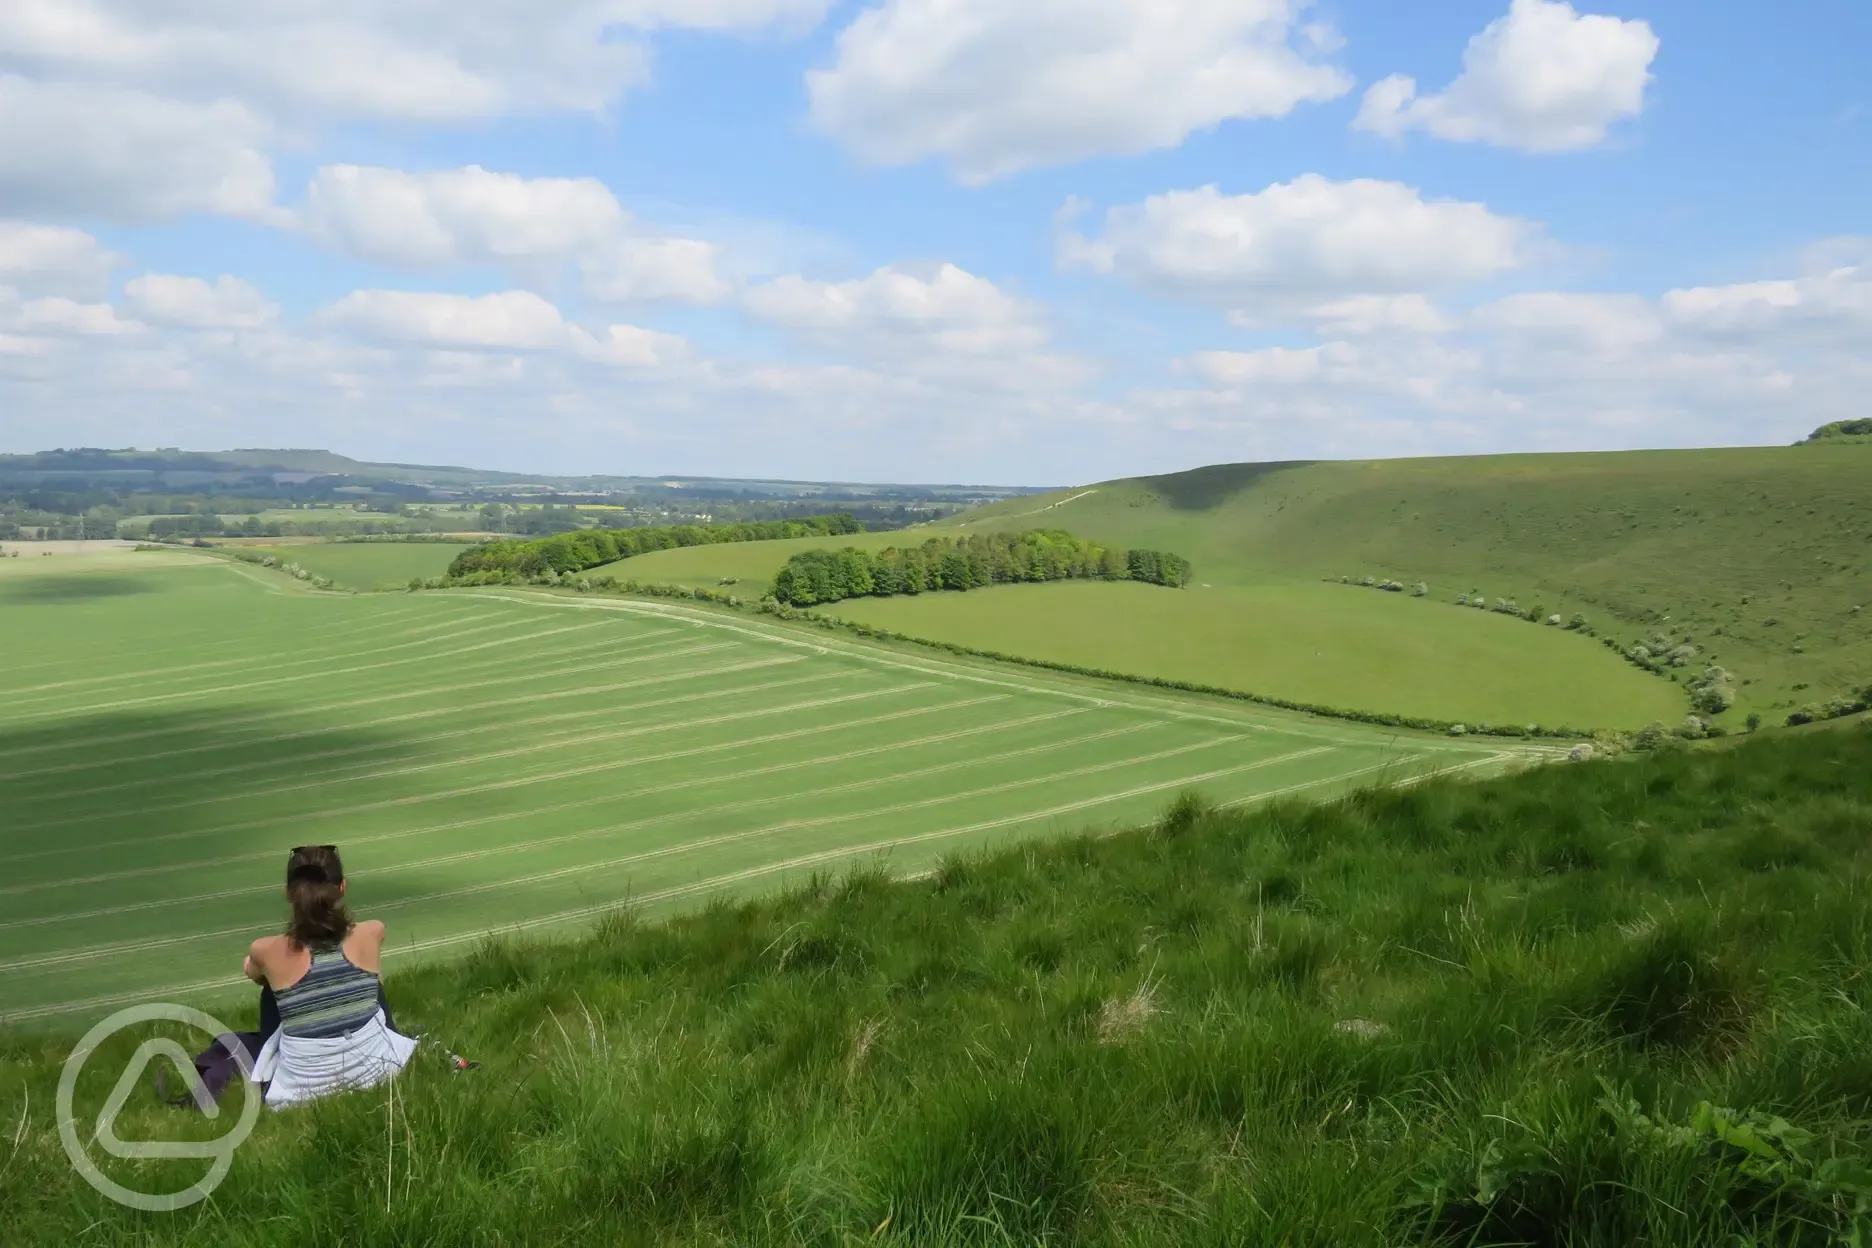 Views of the Vale of Pewsey, an hour walk from your pod